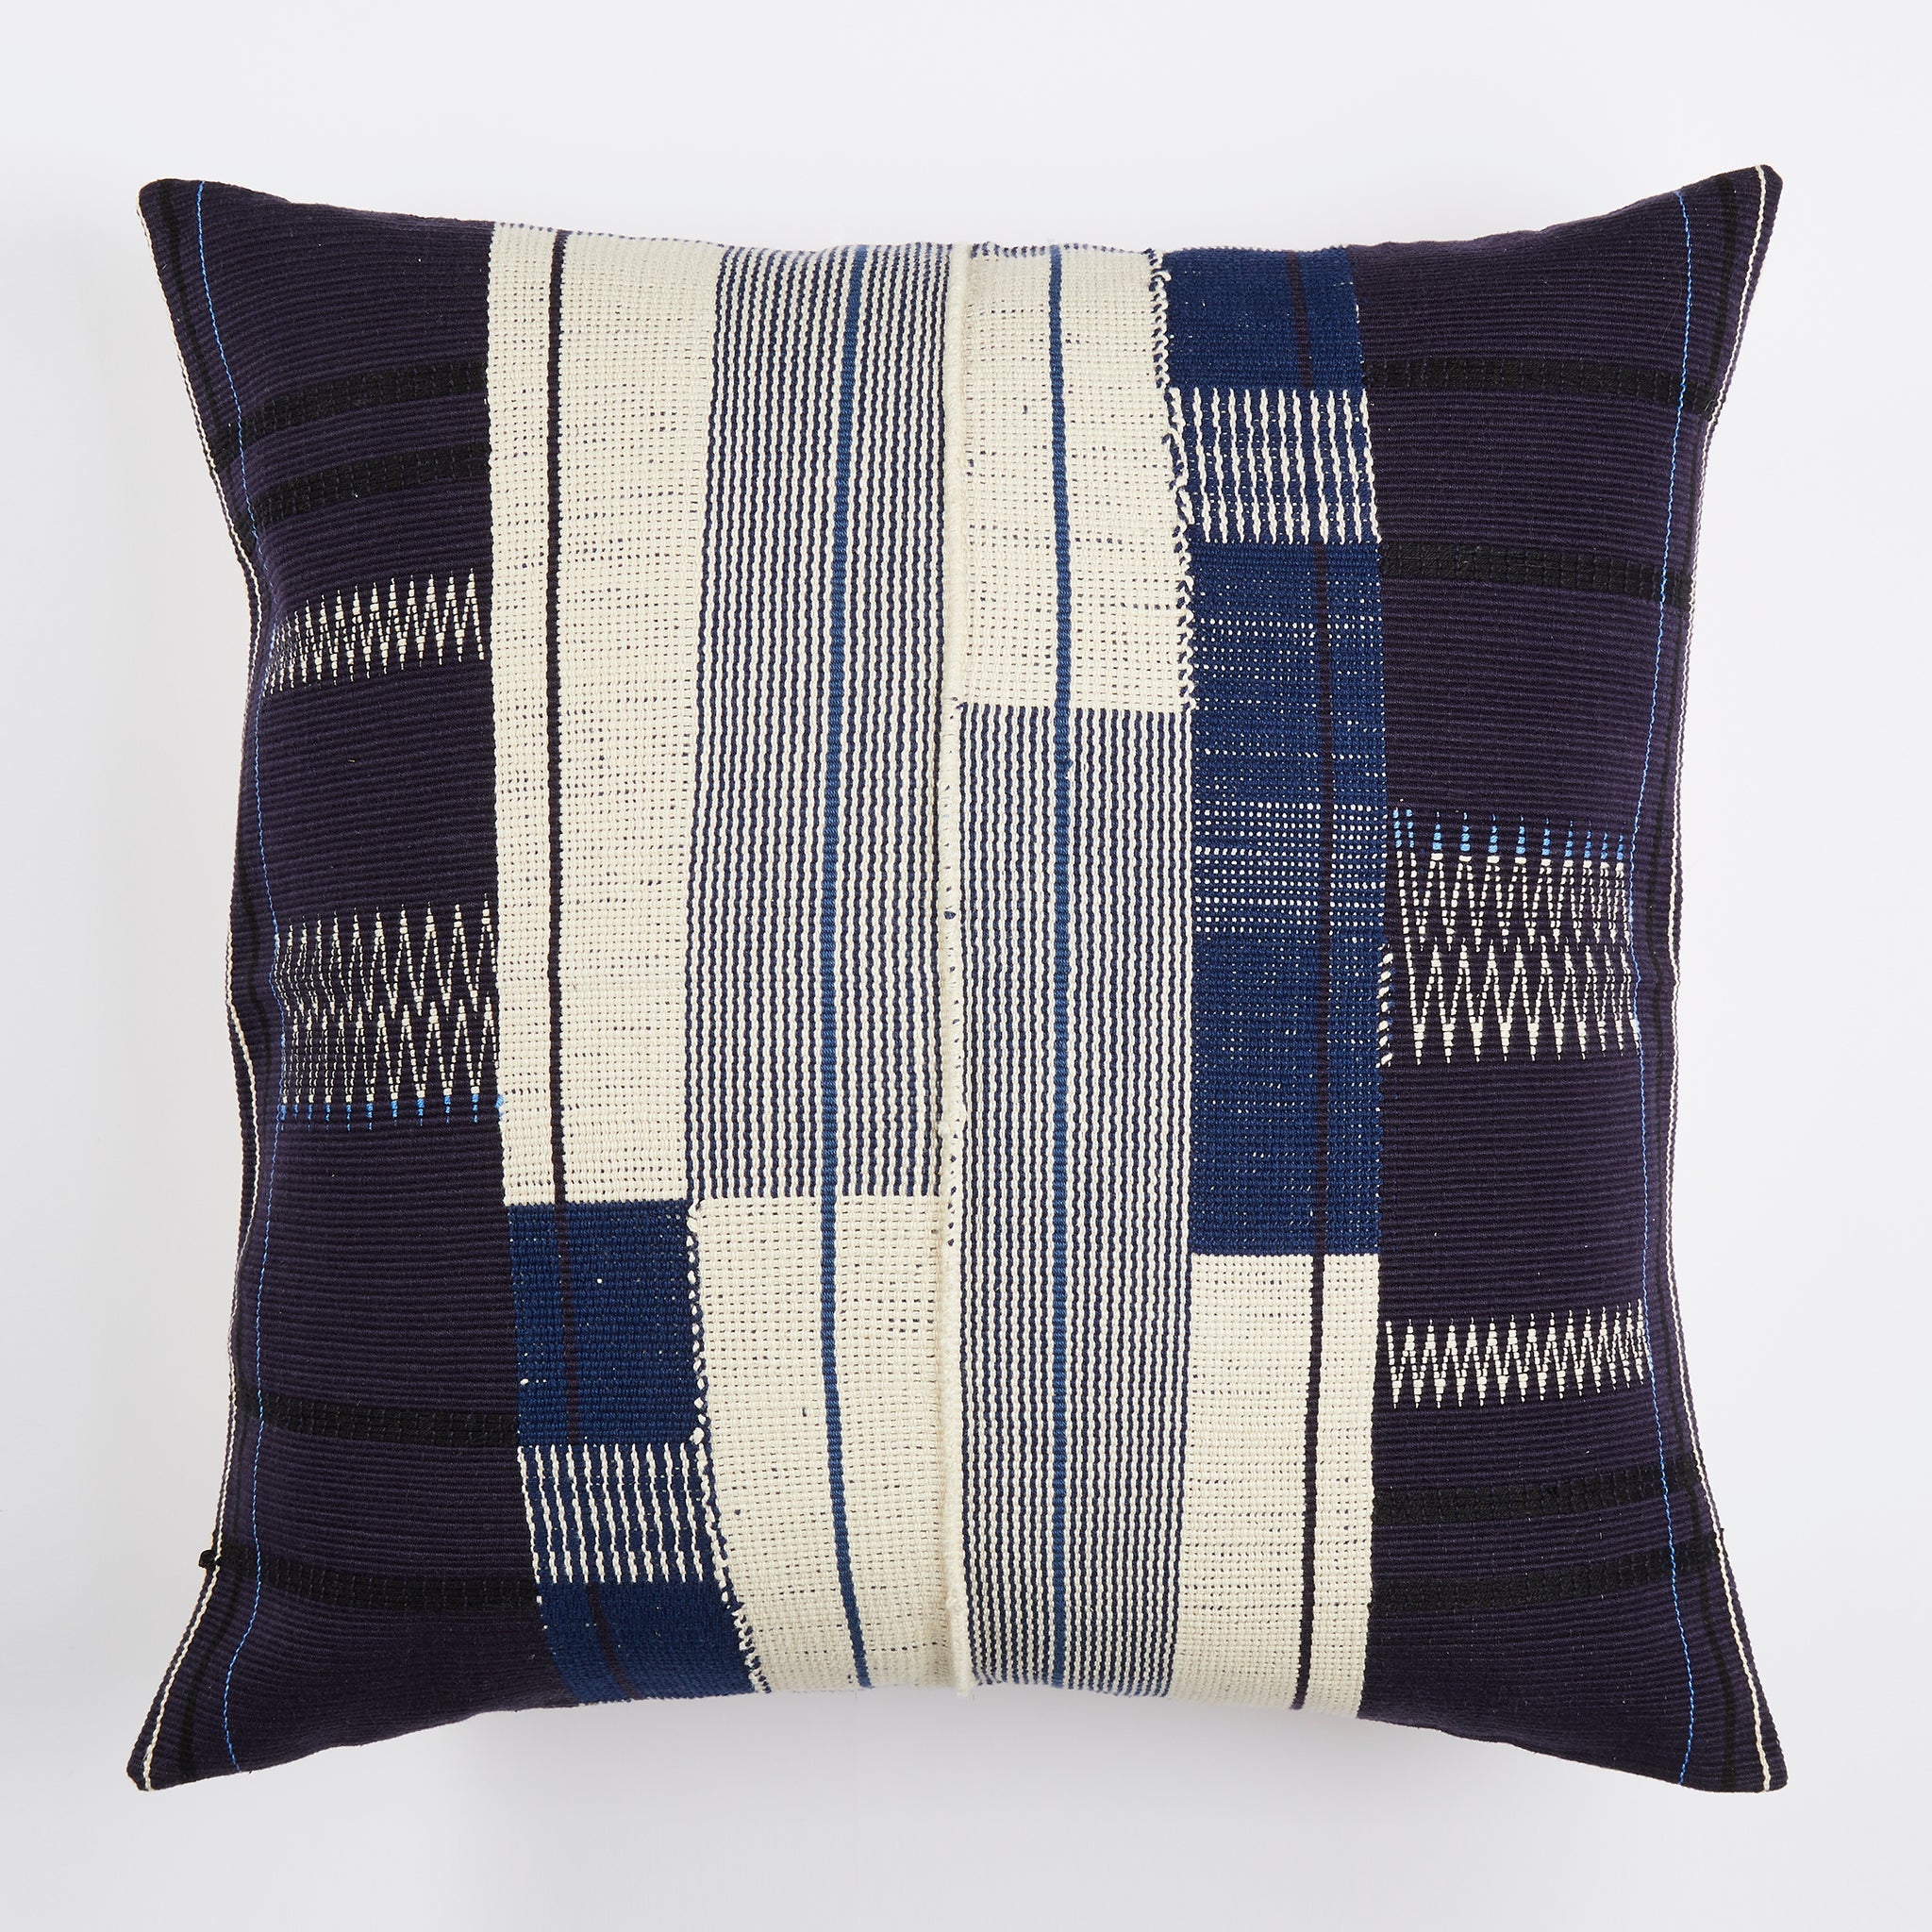 Hand woven cushion Luheje - By Native